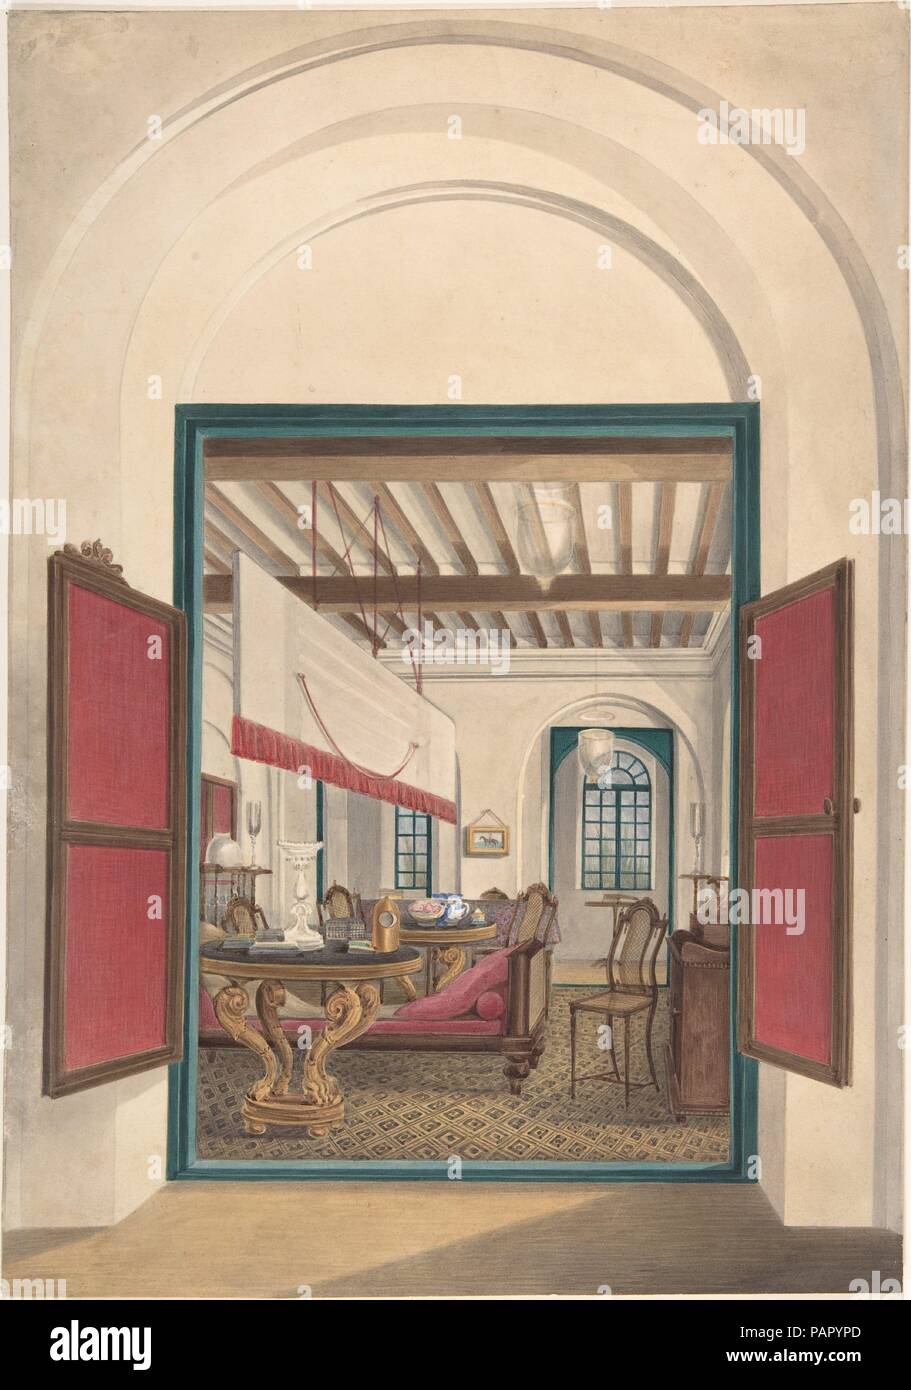 English Interior in India. Artist: Anonymous, British, 19th century. Dimensions: sheet: 14 1/4 x 10 in. (36.2 x 25.4 cm). Date: ca. 1825.  Painted by a skilled unidentified watercolorist, this work records a well-appointed early nineteenth-century room in India during the East India Company period, as viewed from an adjacent veranda. The two pedestal tables with scrolled, gilded legs are likely European imports, while the caned side chairs and low day bed would have been locally made. Swinging half doors and a punkah (a manually operated hanging cloth fan) encourage air circulation, and tall g Stock Photo